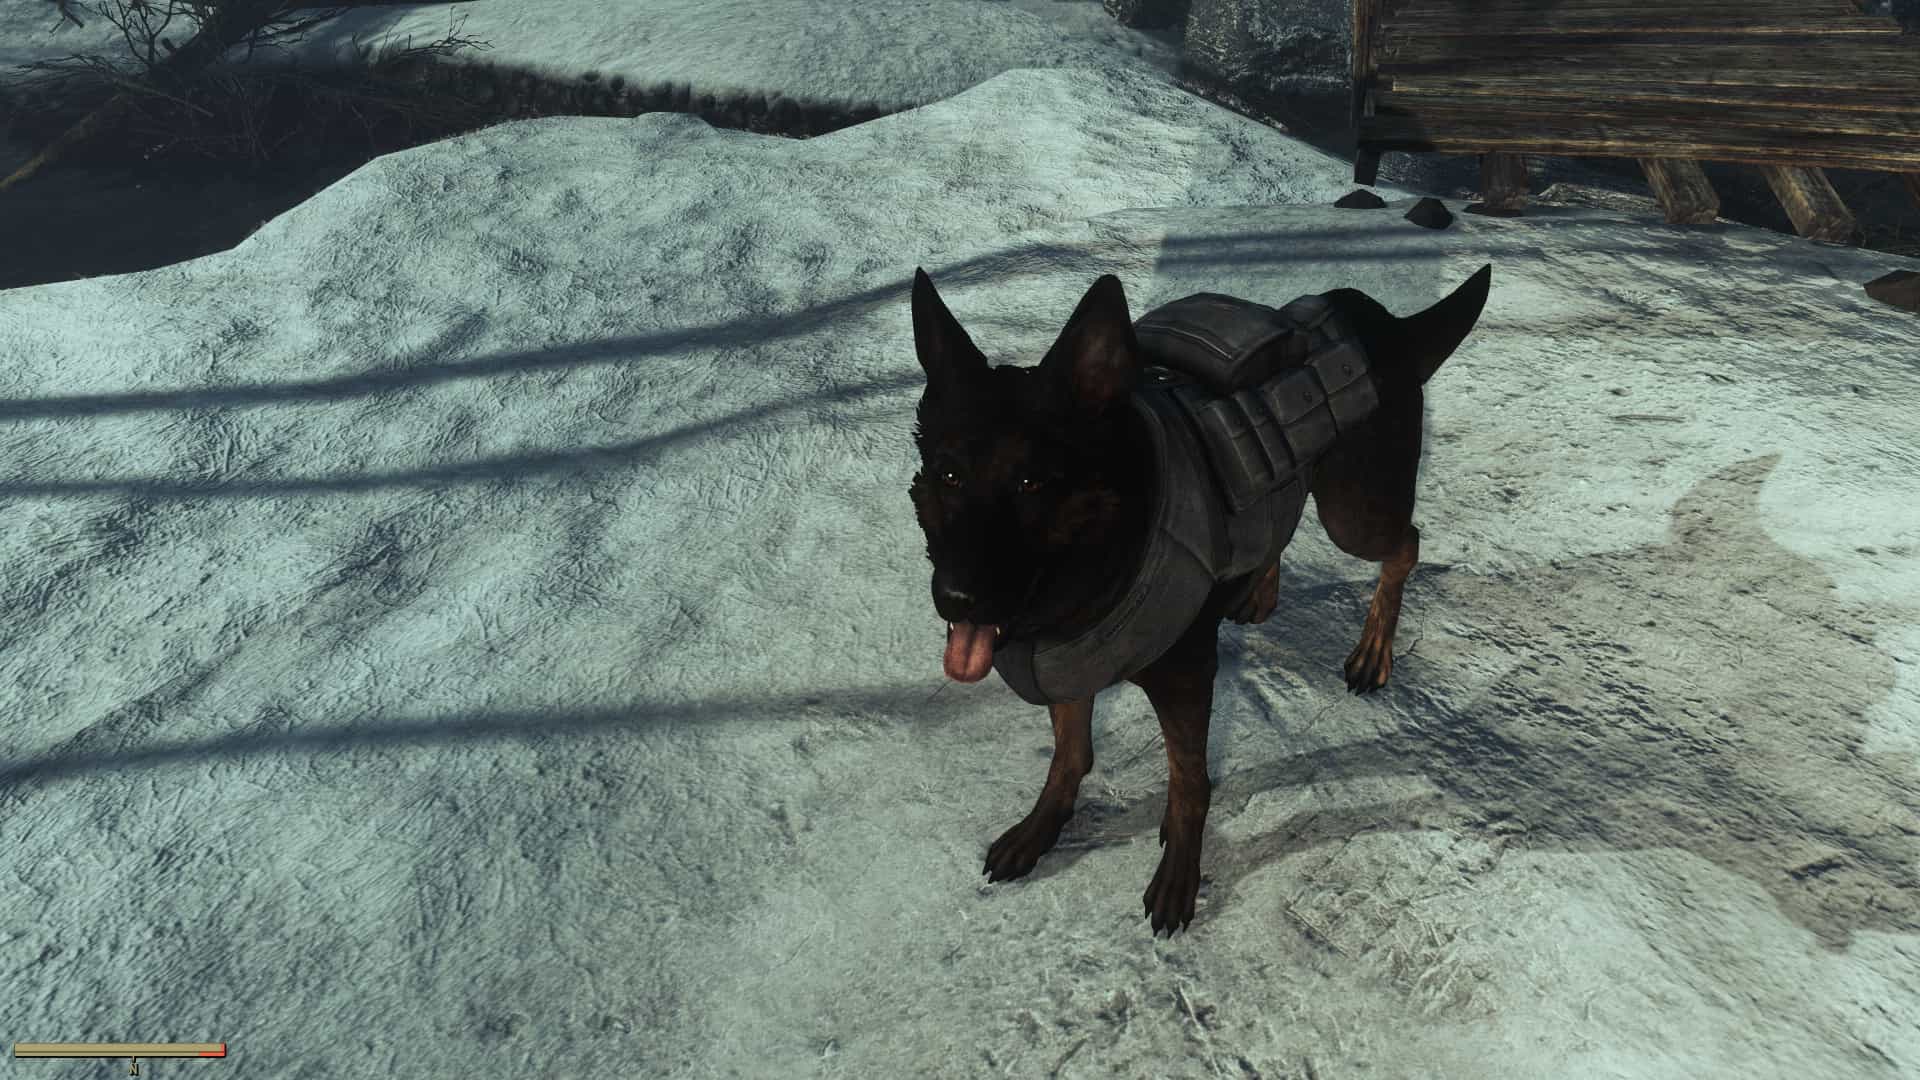 Frost - Dogmeat resurrected - Fallout 4 Mod Download